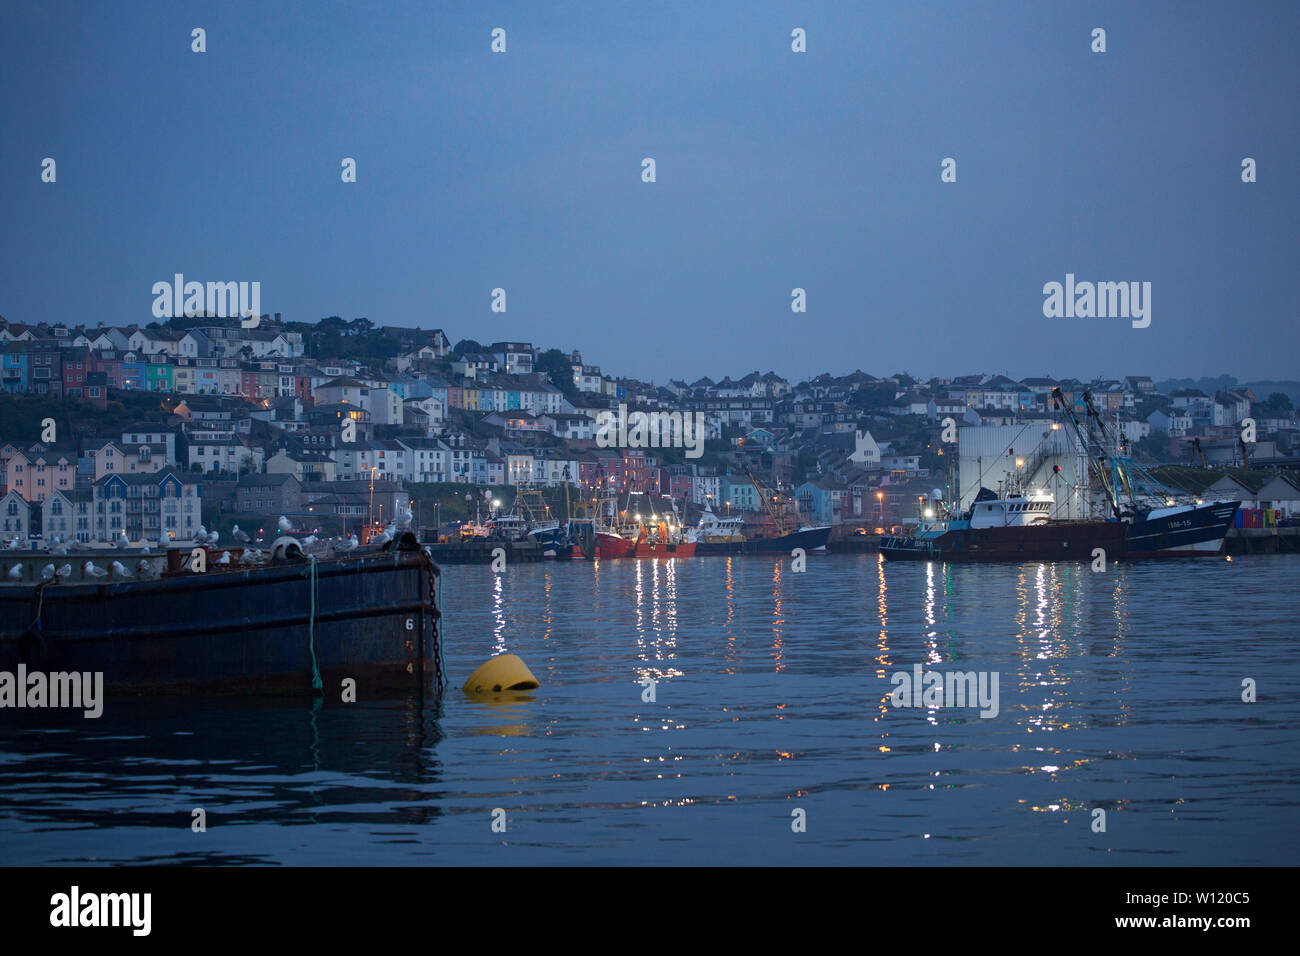 A view of Brixham and the houses overlooking the harbour with fishing vessels in the foreground in the evening in June. Brixham Devon England UK GB Stock Photo